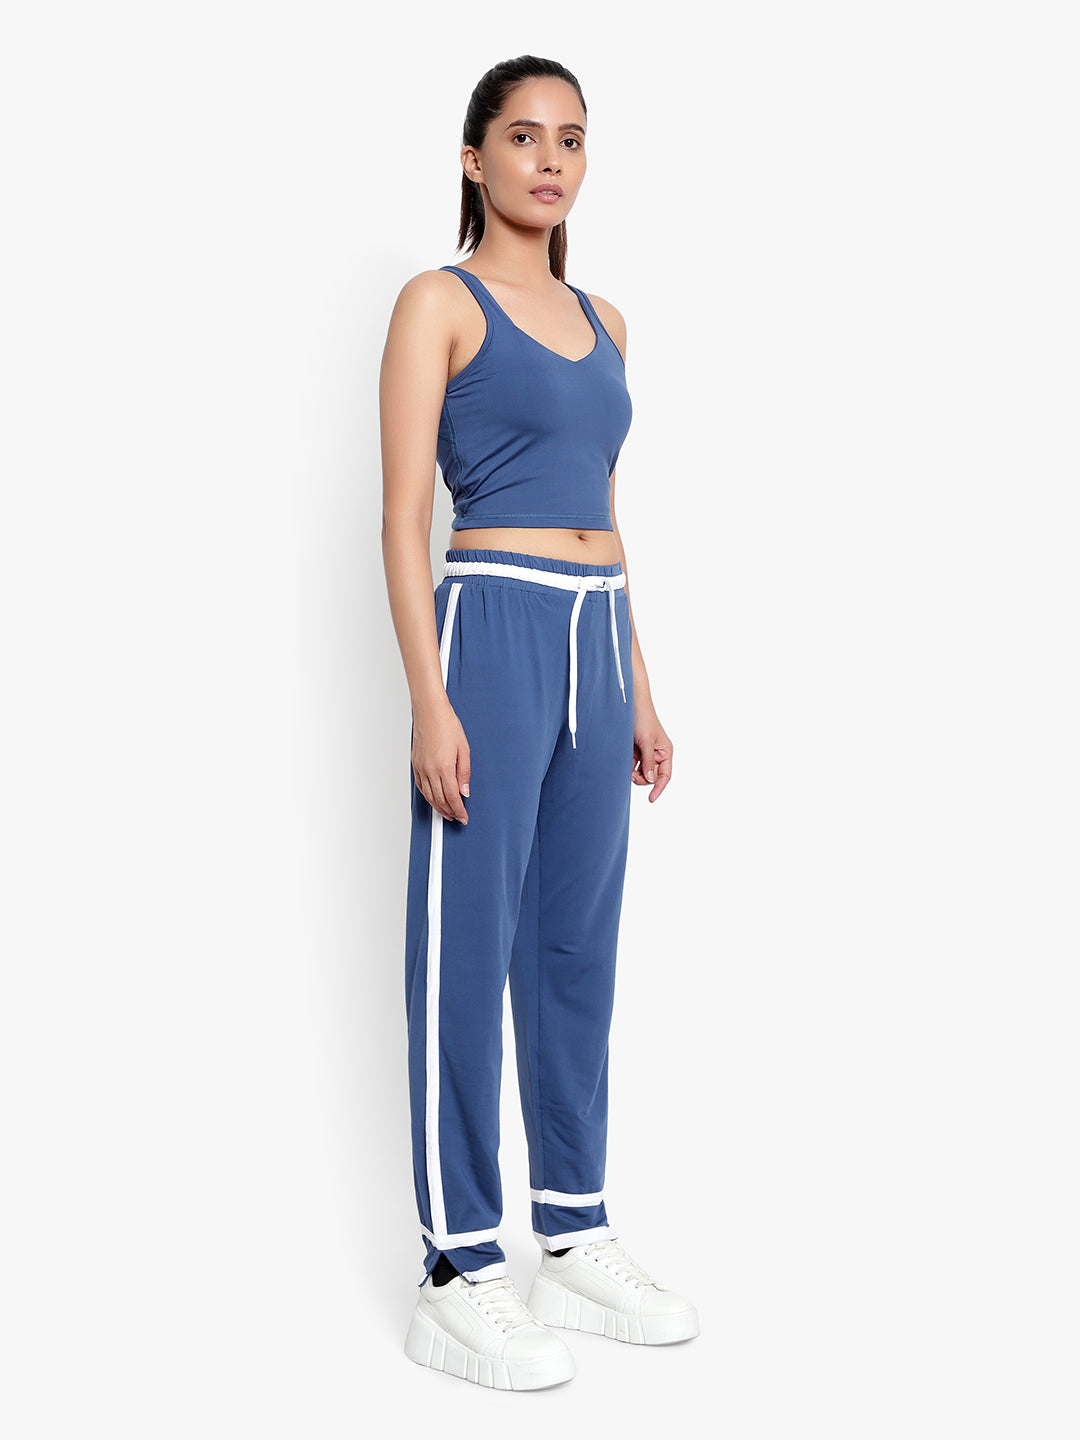 Axis Tank Top & Track Pant - Navy Blue